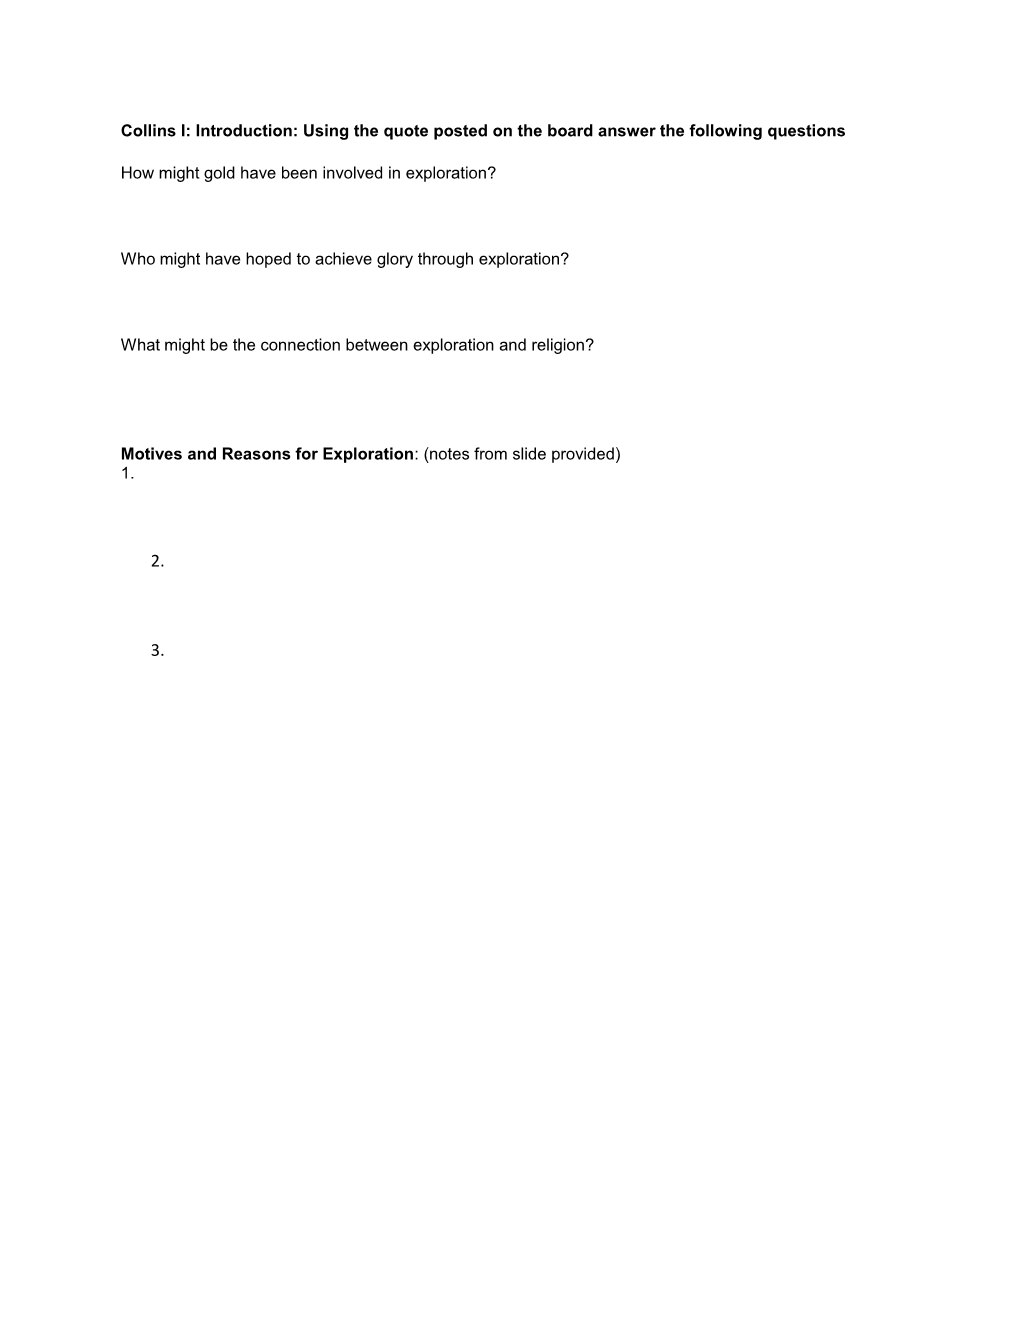 Collins I: Introduction: Using the Quote Posted on the Board Answer the Following Questions